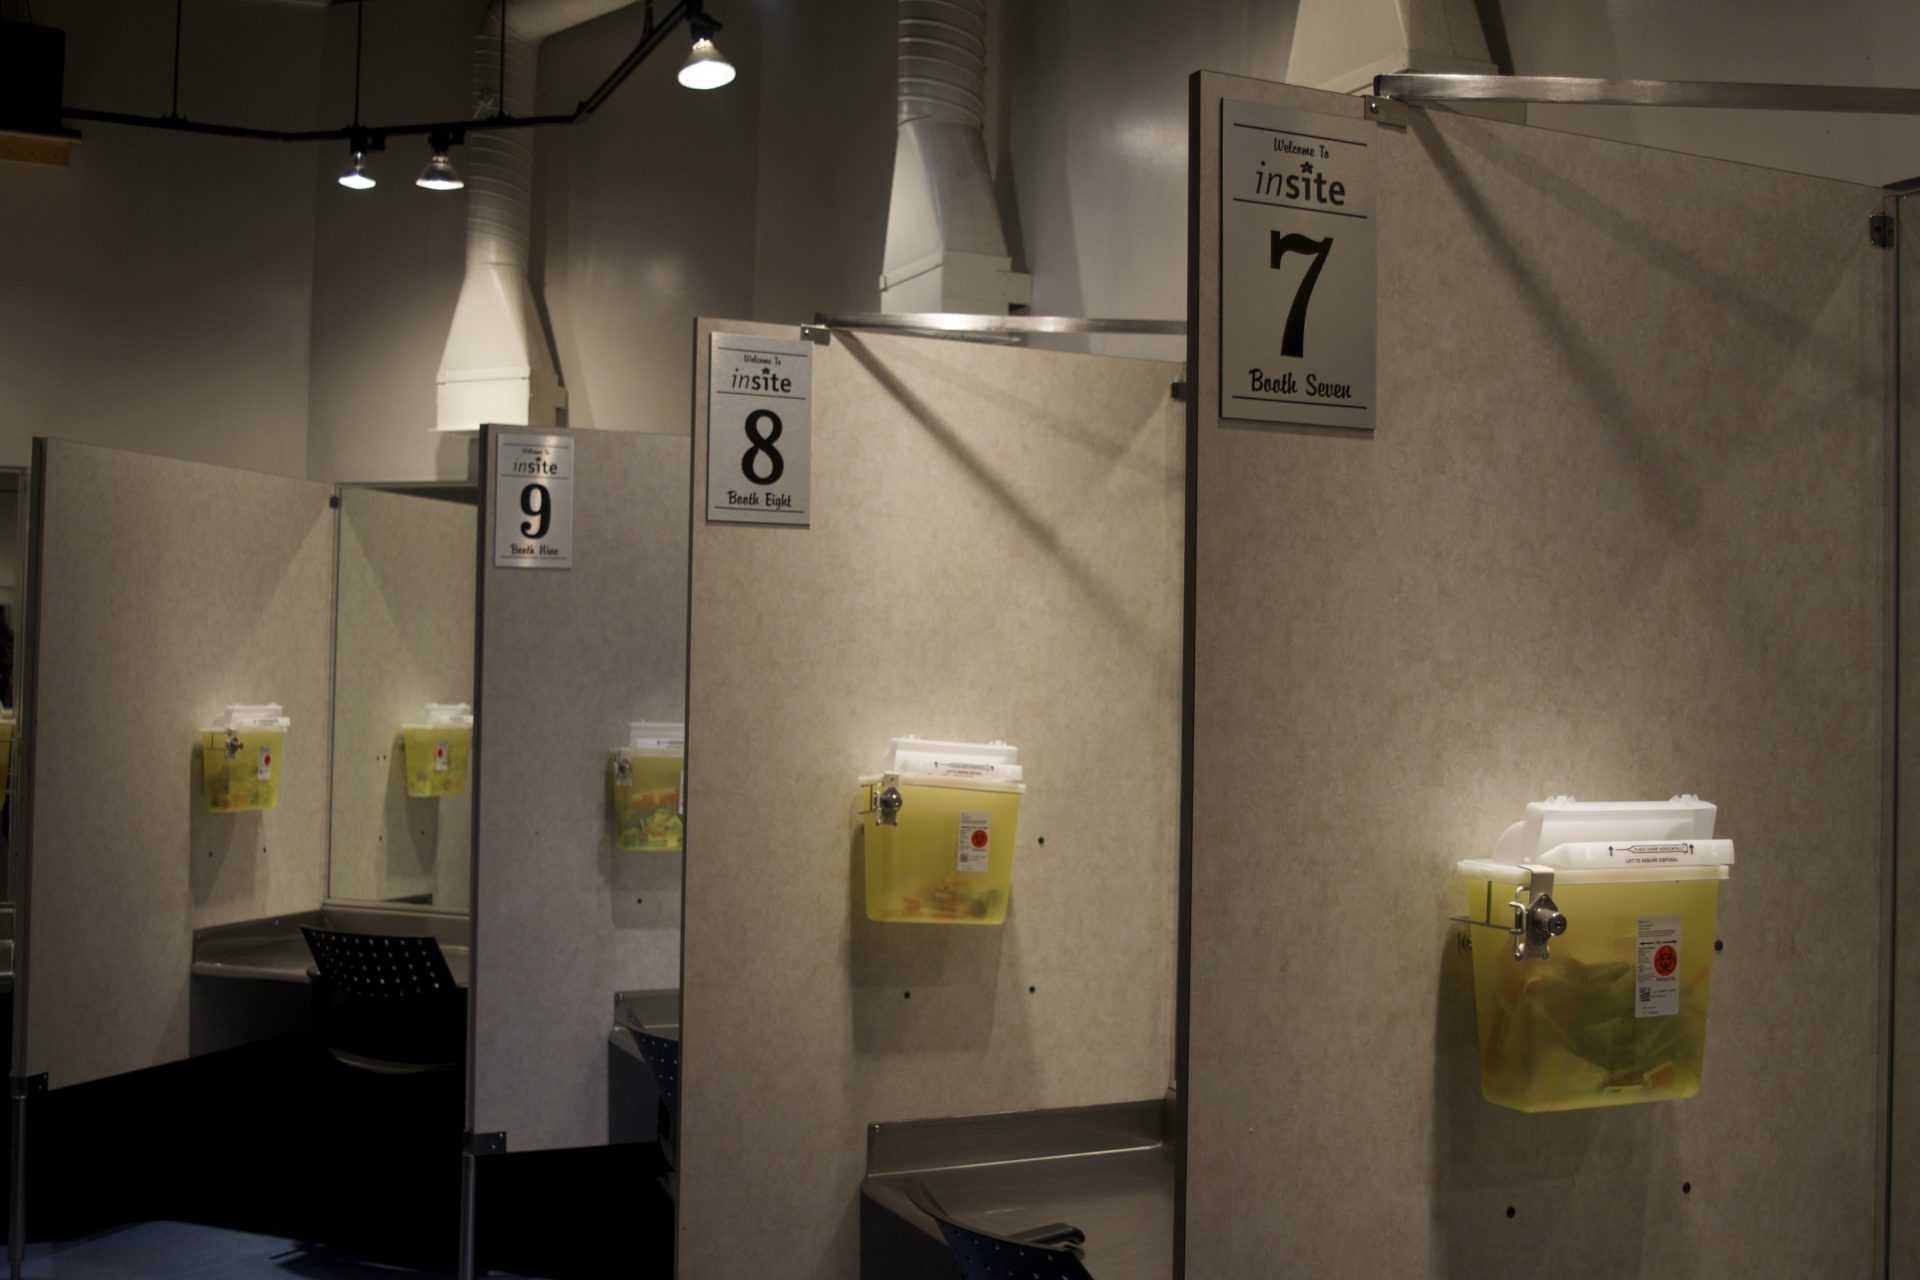 Inside Insite, North America’s first public supervised injection facility, located in Vancouver.